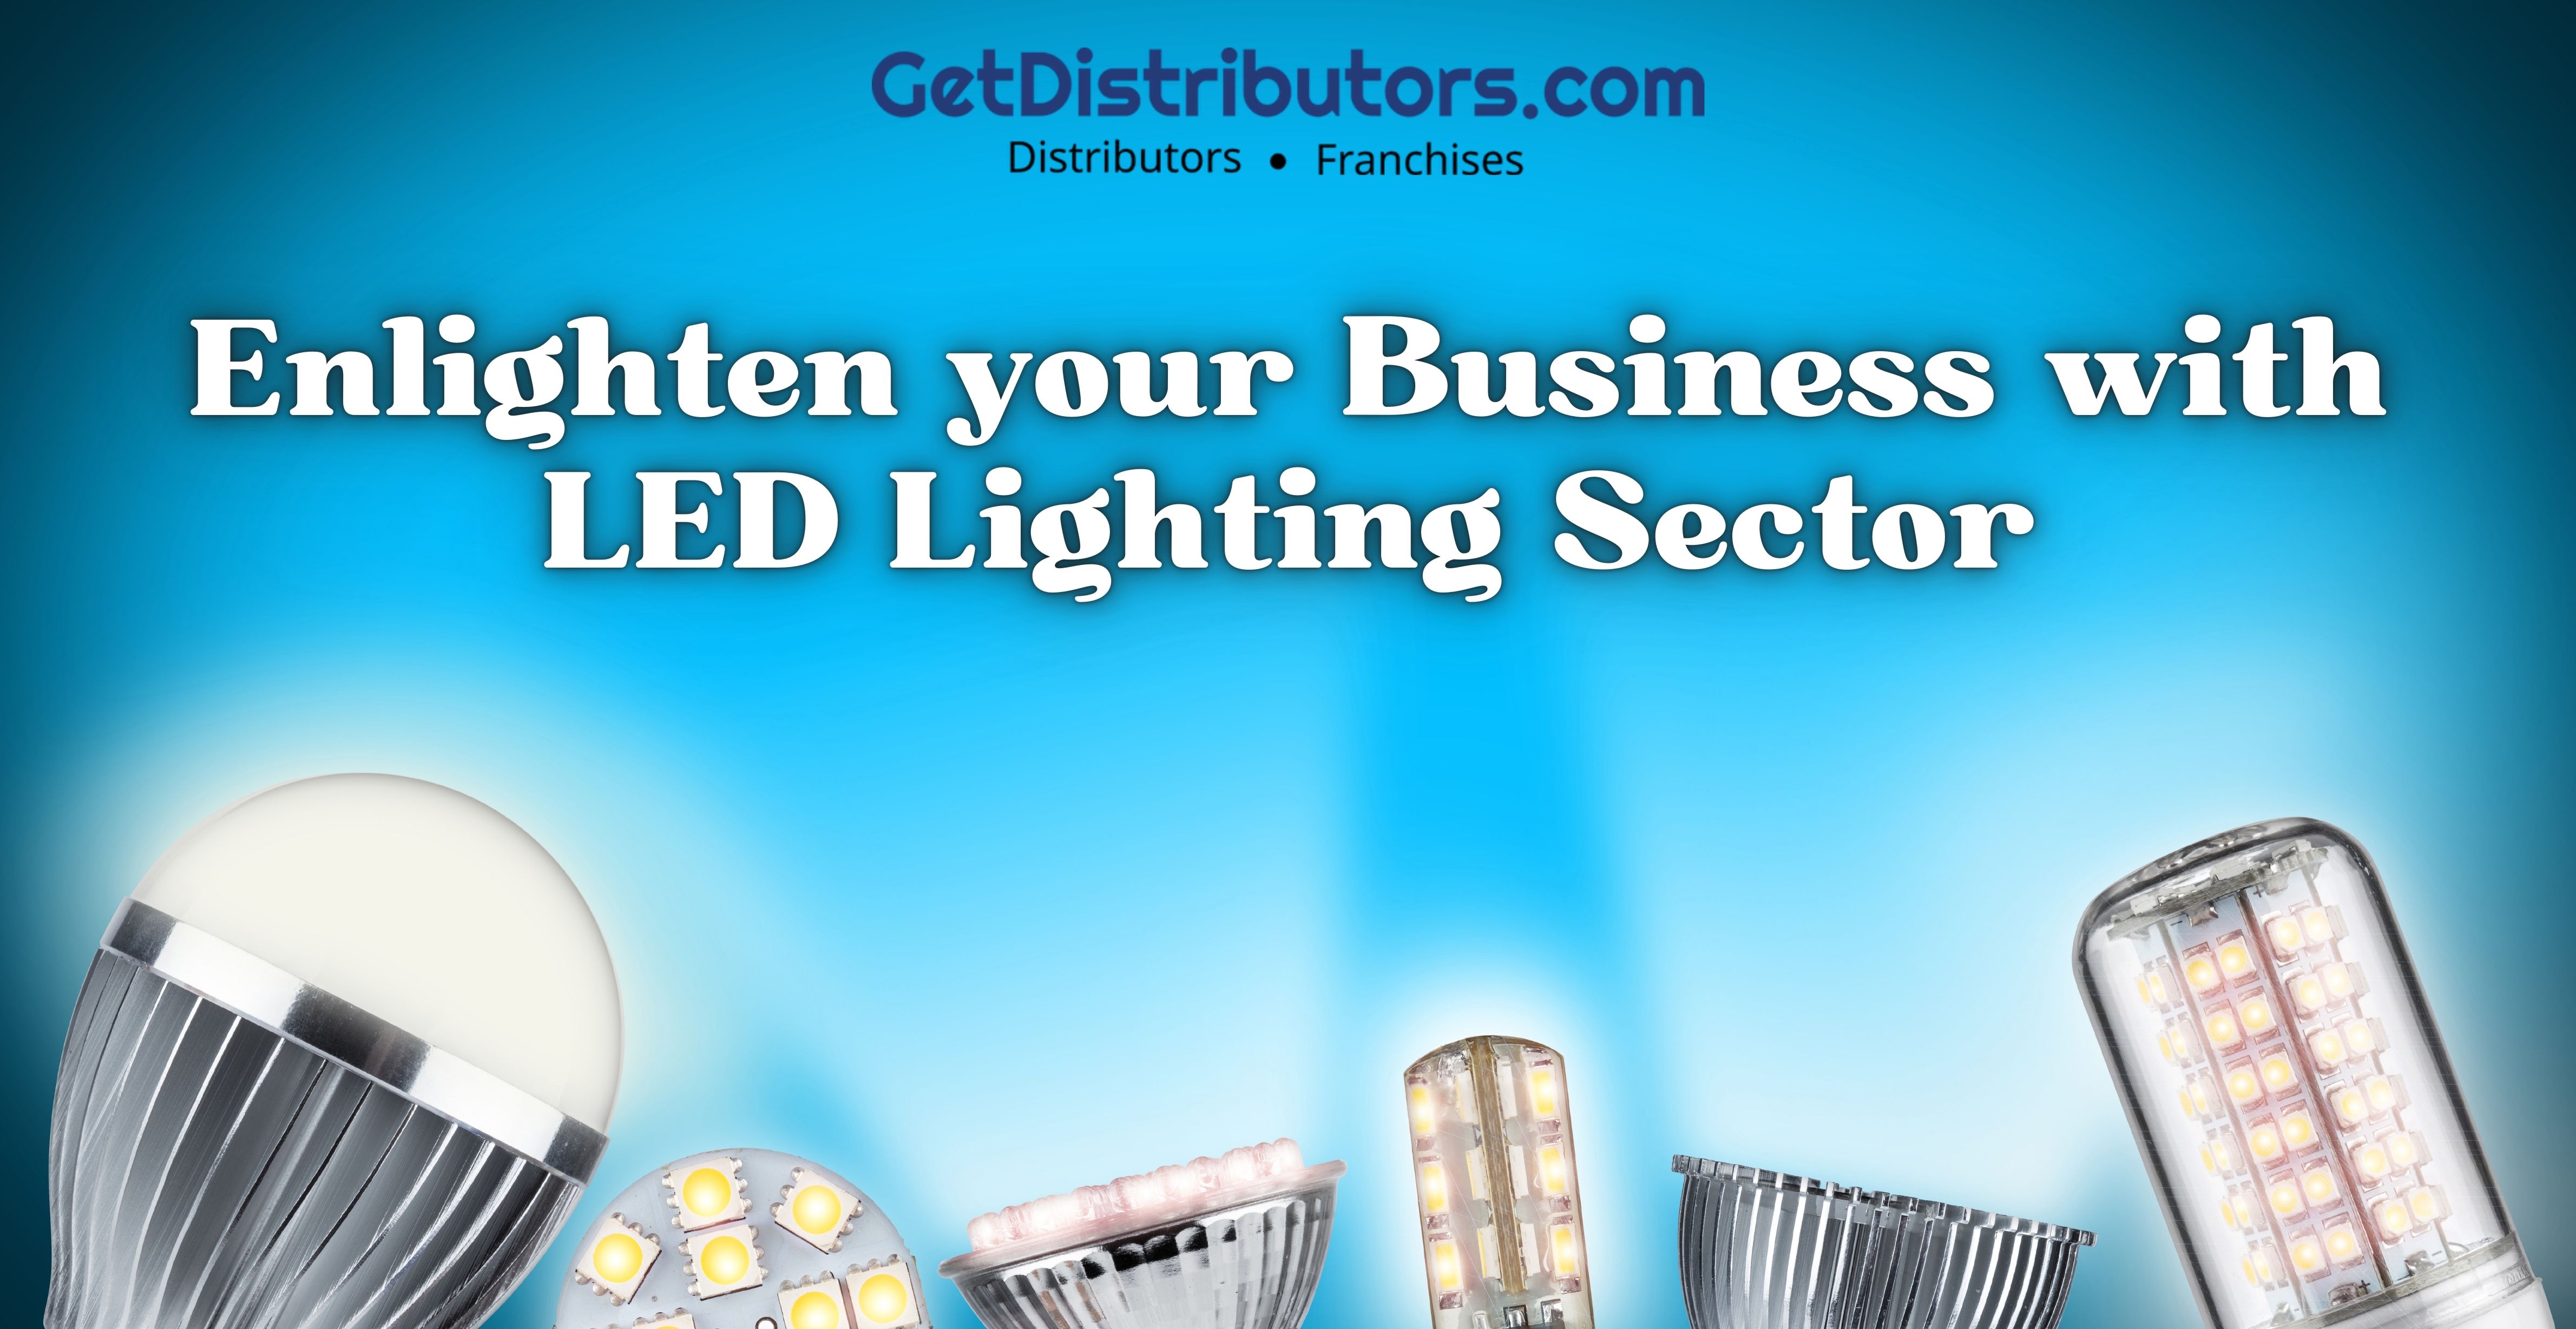 Enlighten your Business with LED Lighting Sector